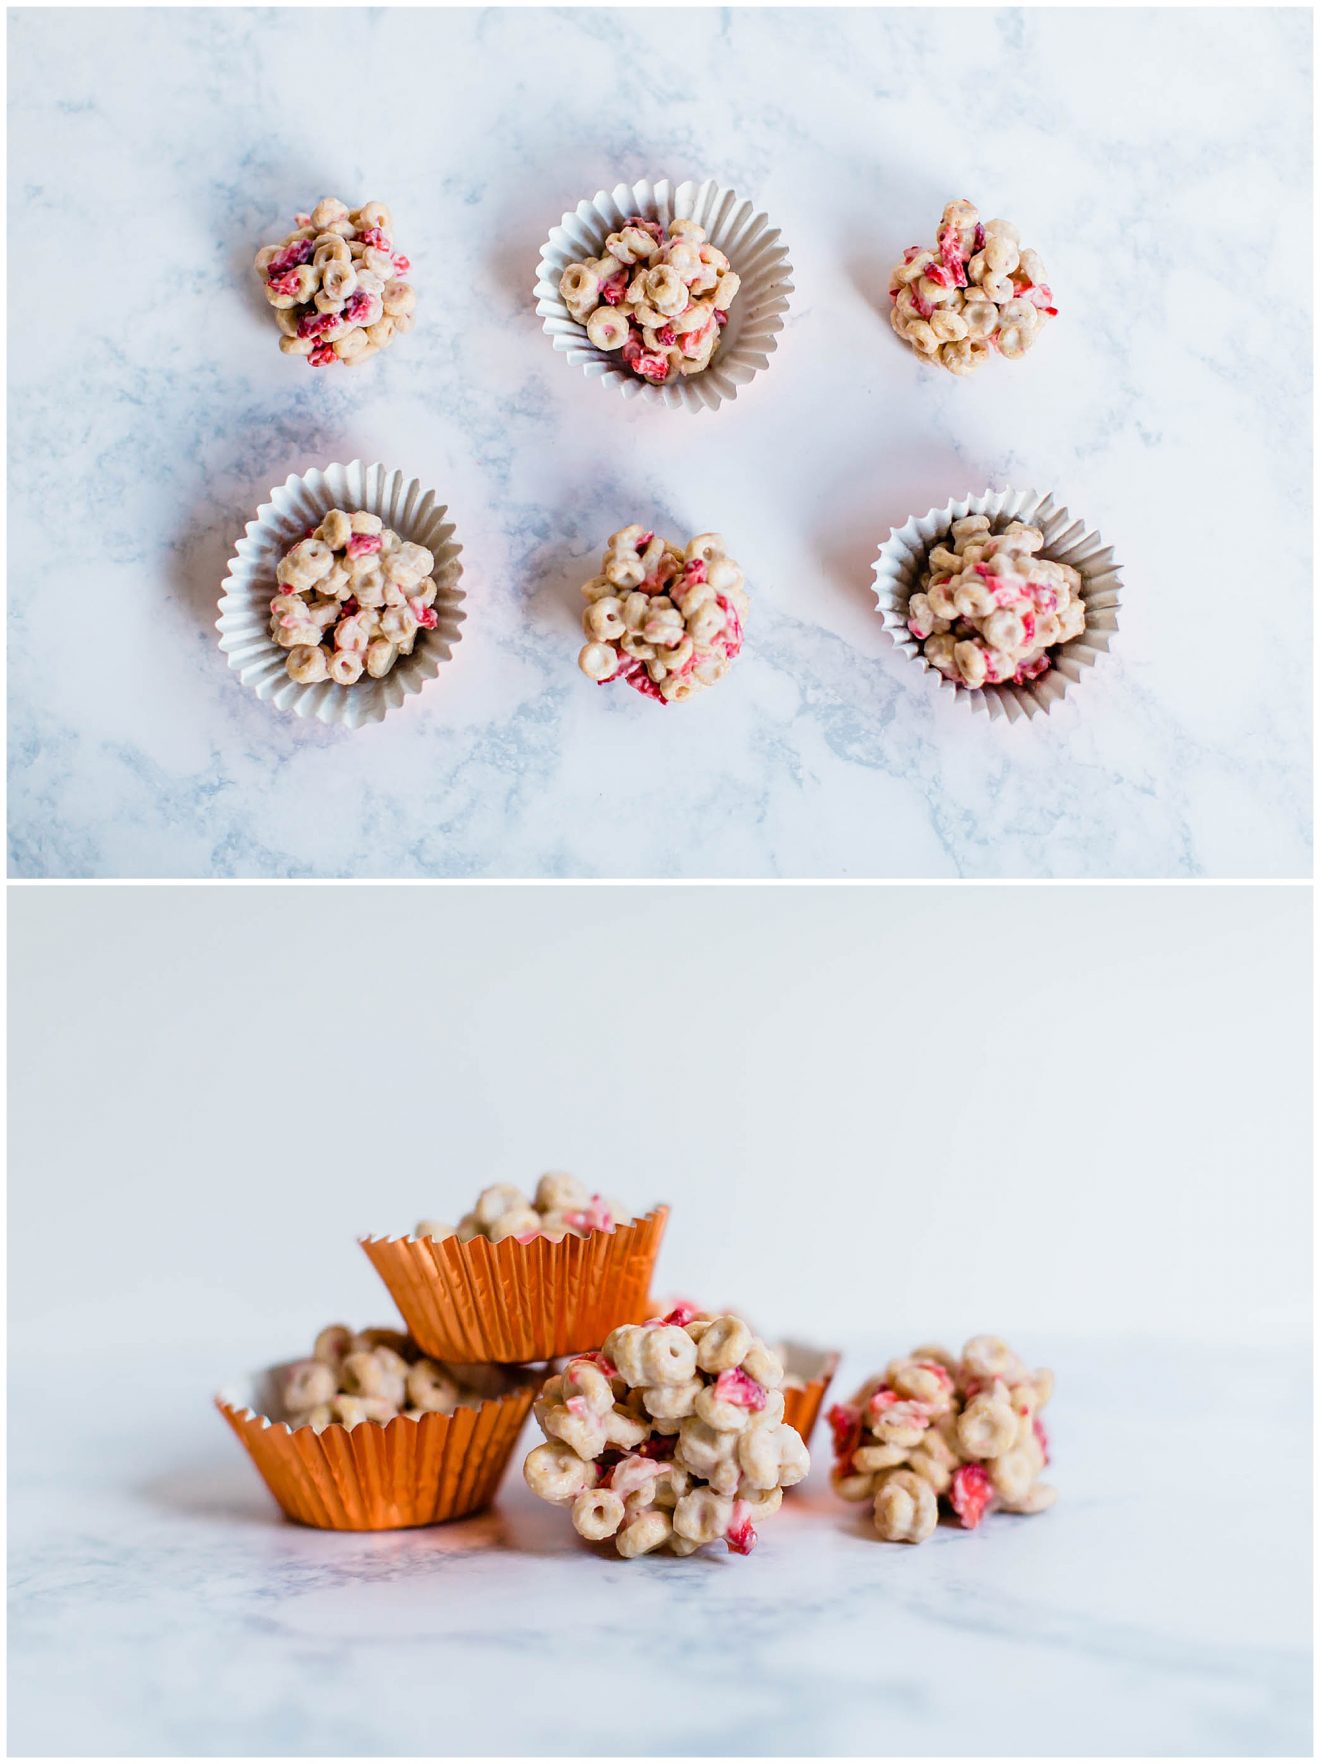 Yogurt-Covered Whole Grain Cereal Clusters